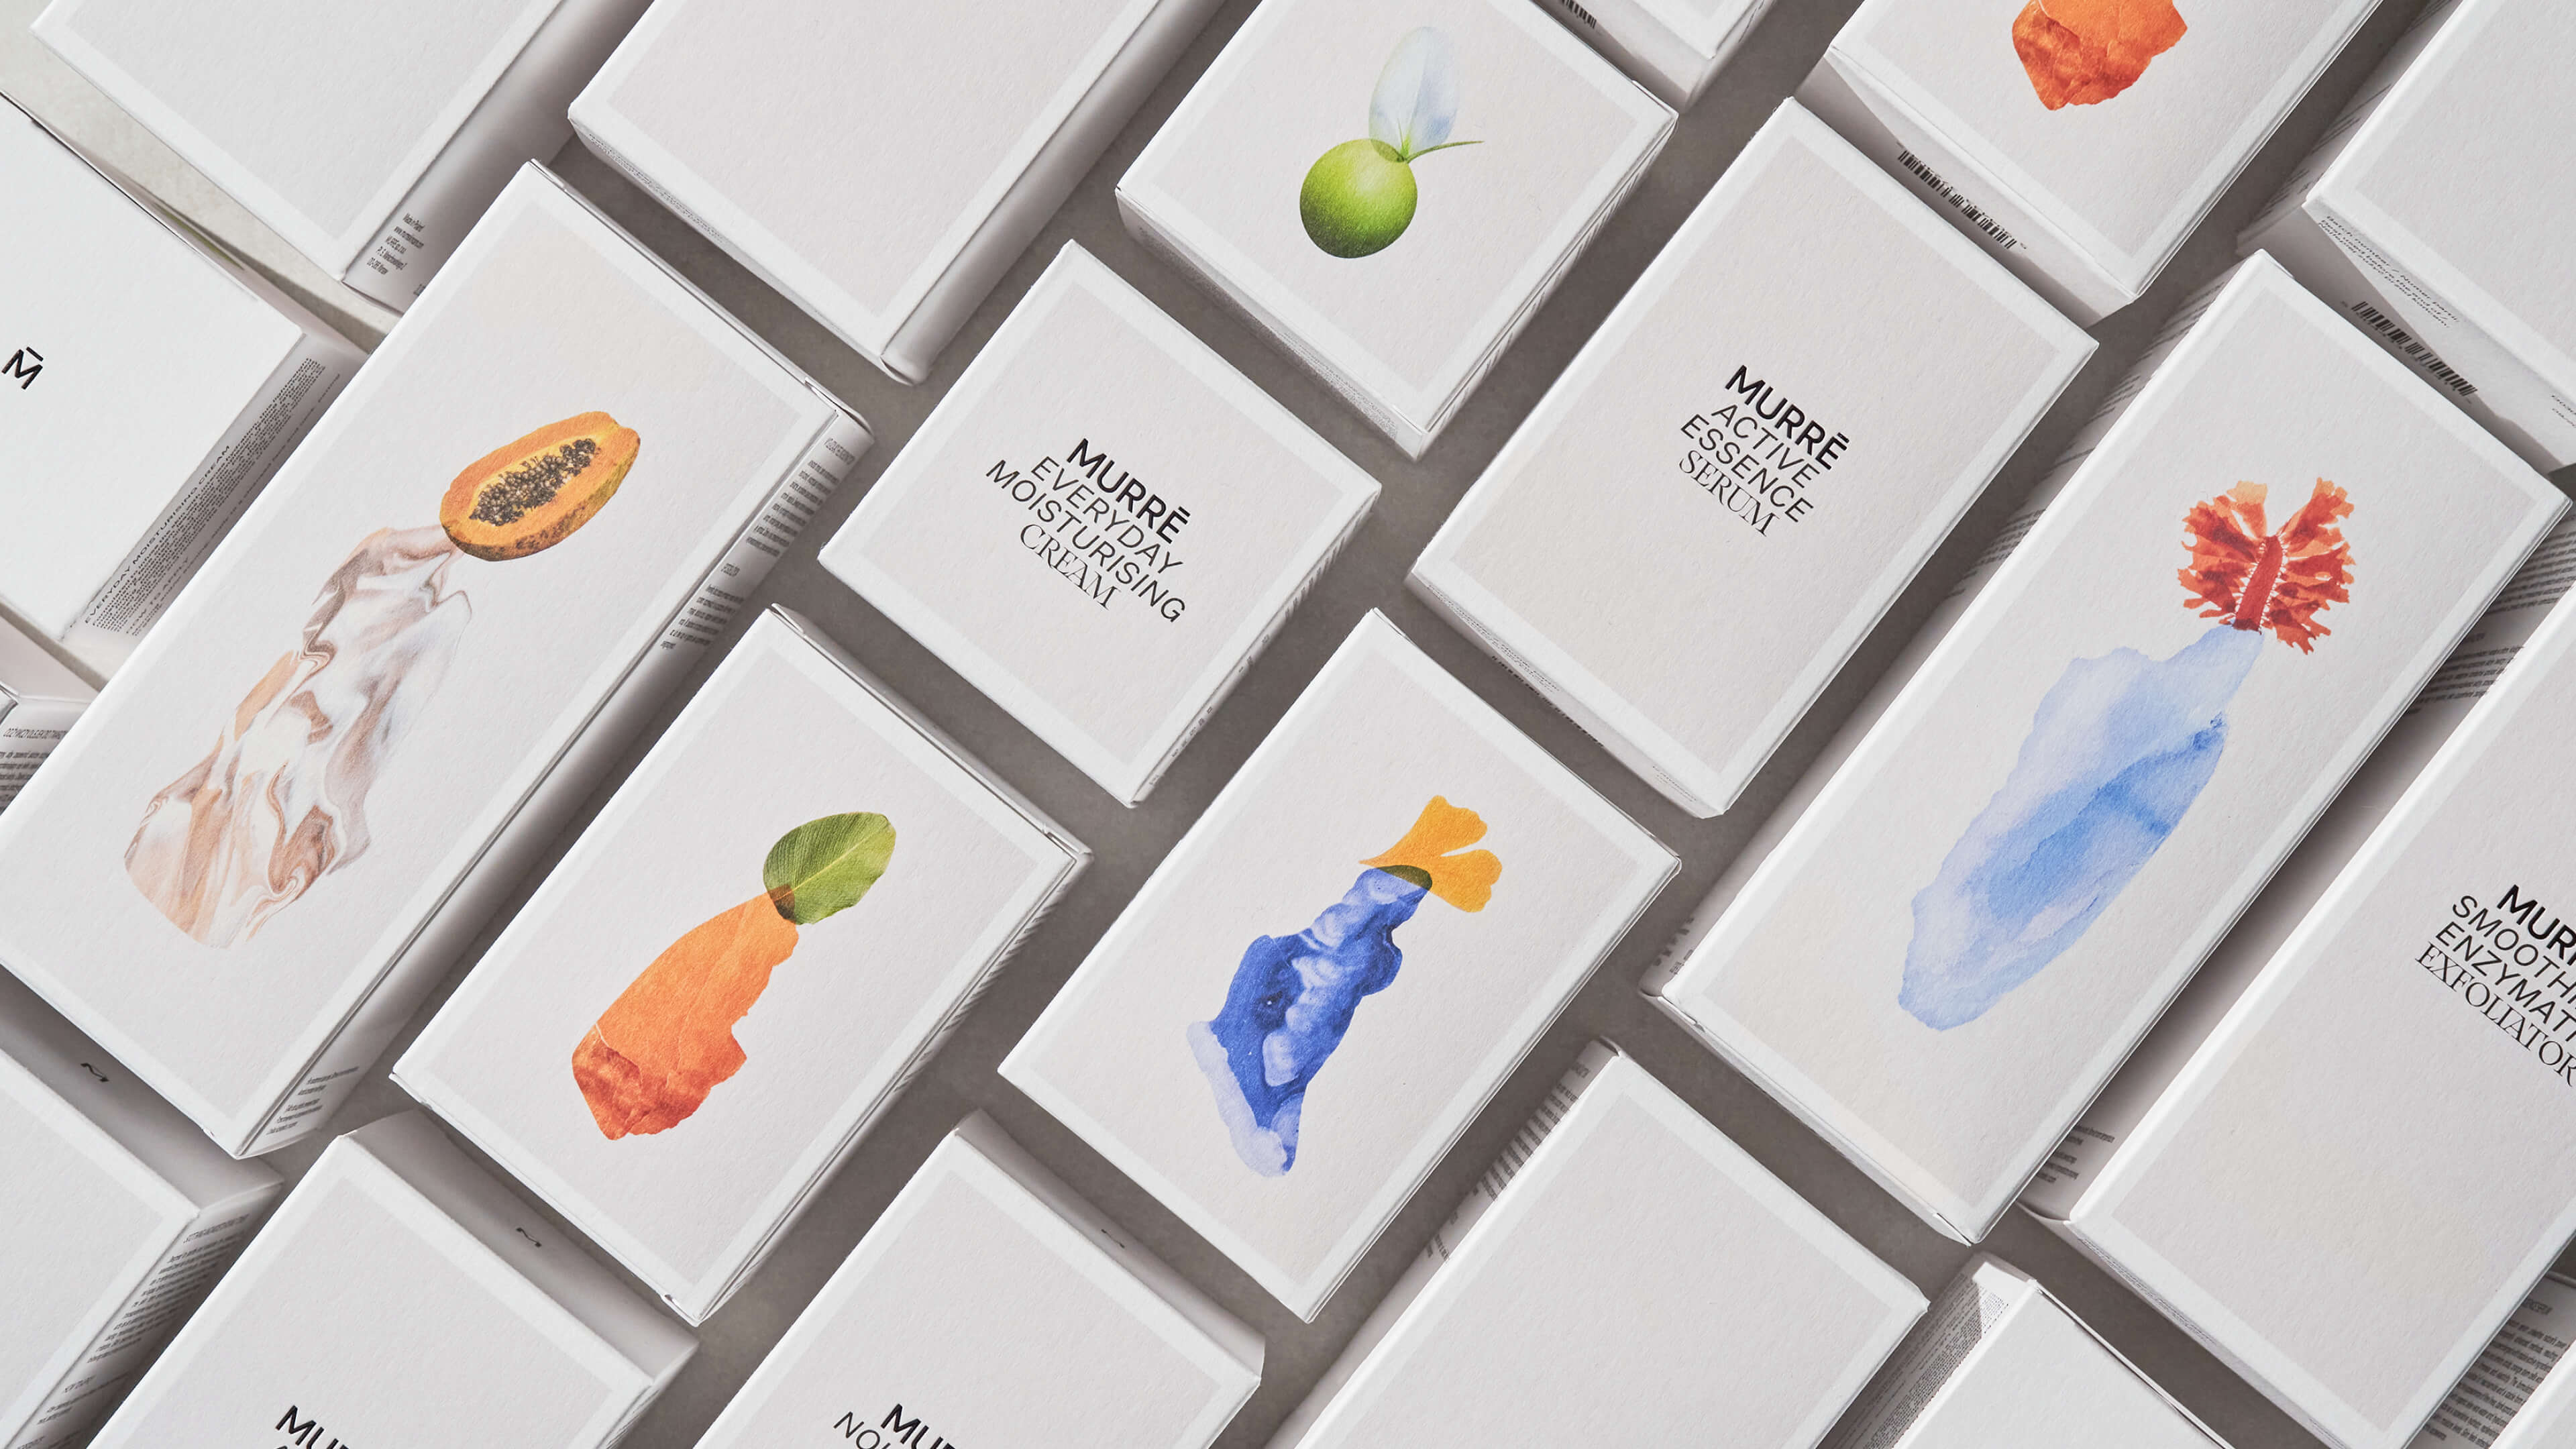 Brand Identity and Packaging Creation for Murrē Skincare by Hugmun Studio